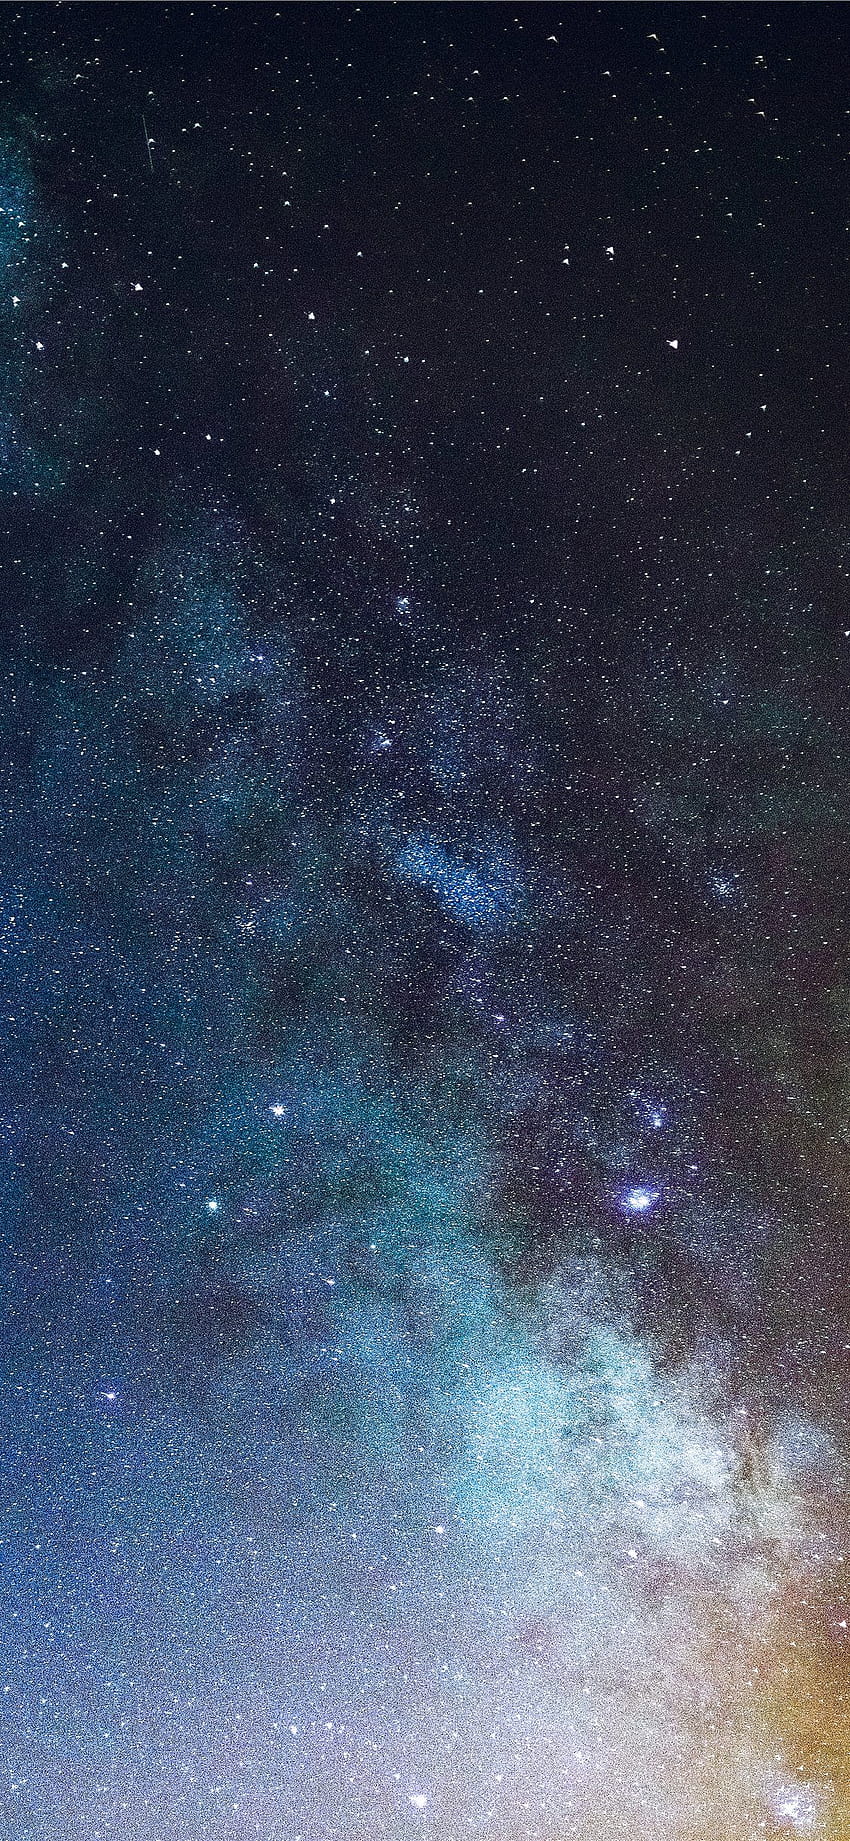 Milky Way over Quelfes Portugal iPhone X, Milky Way Android HD phone wallpaper